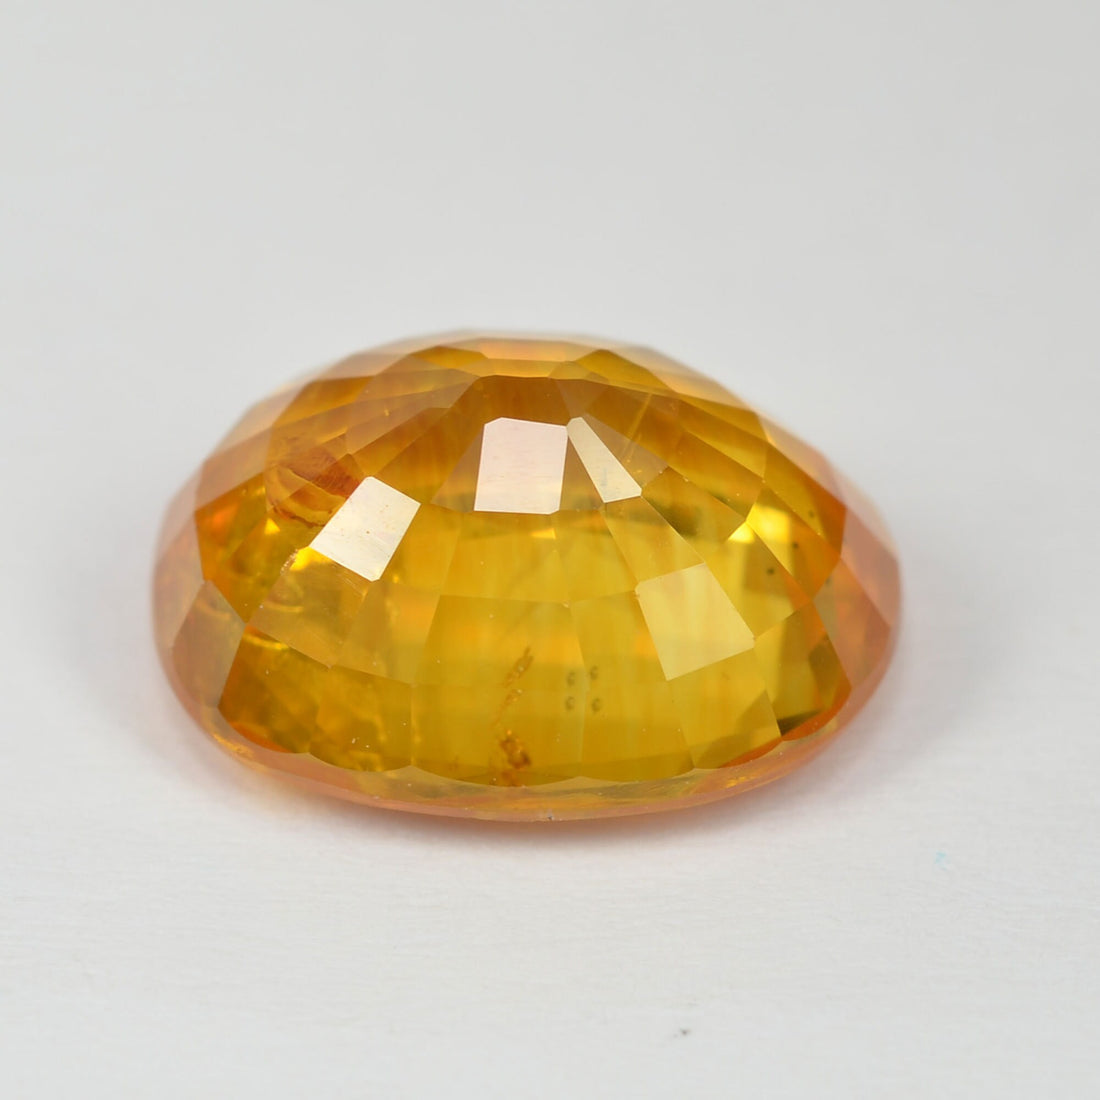 4.67 cts Natural Yellow Sapphire Loose Gemstone Oval Cut